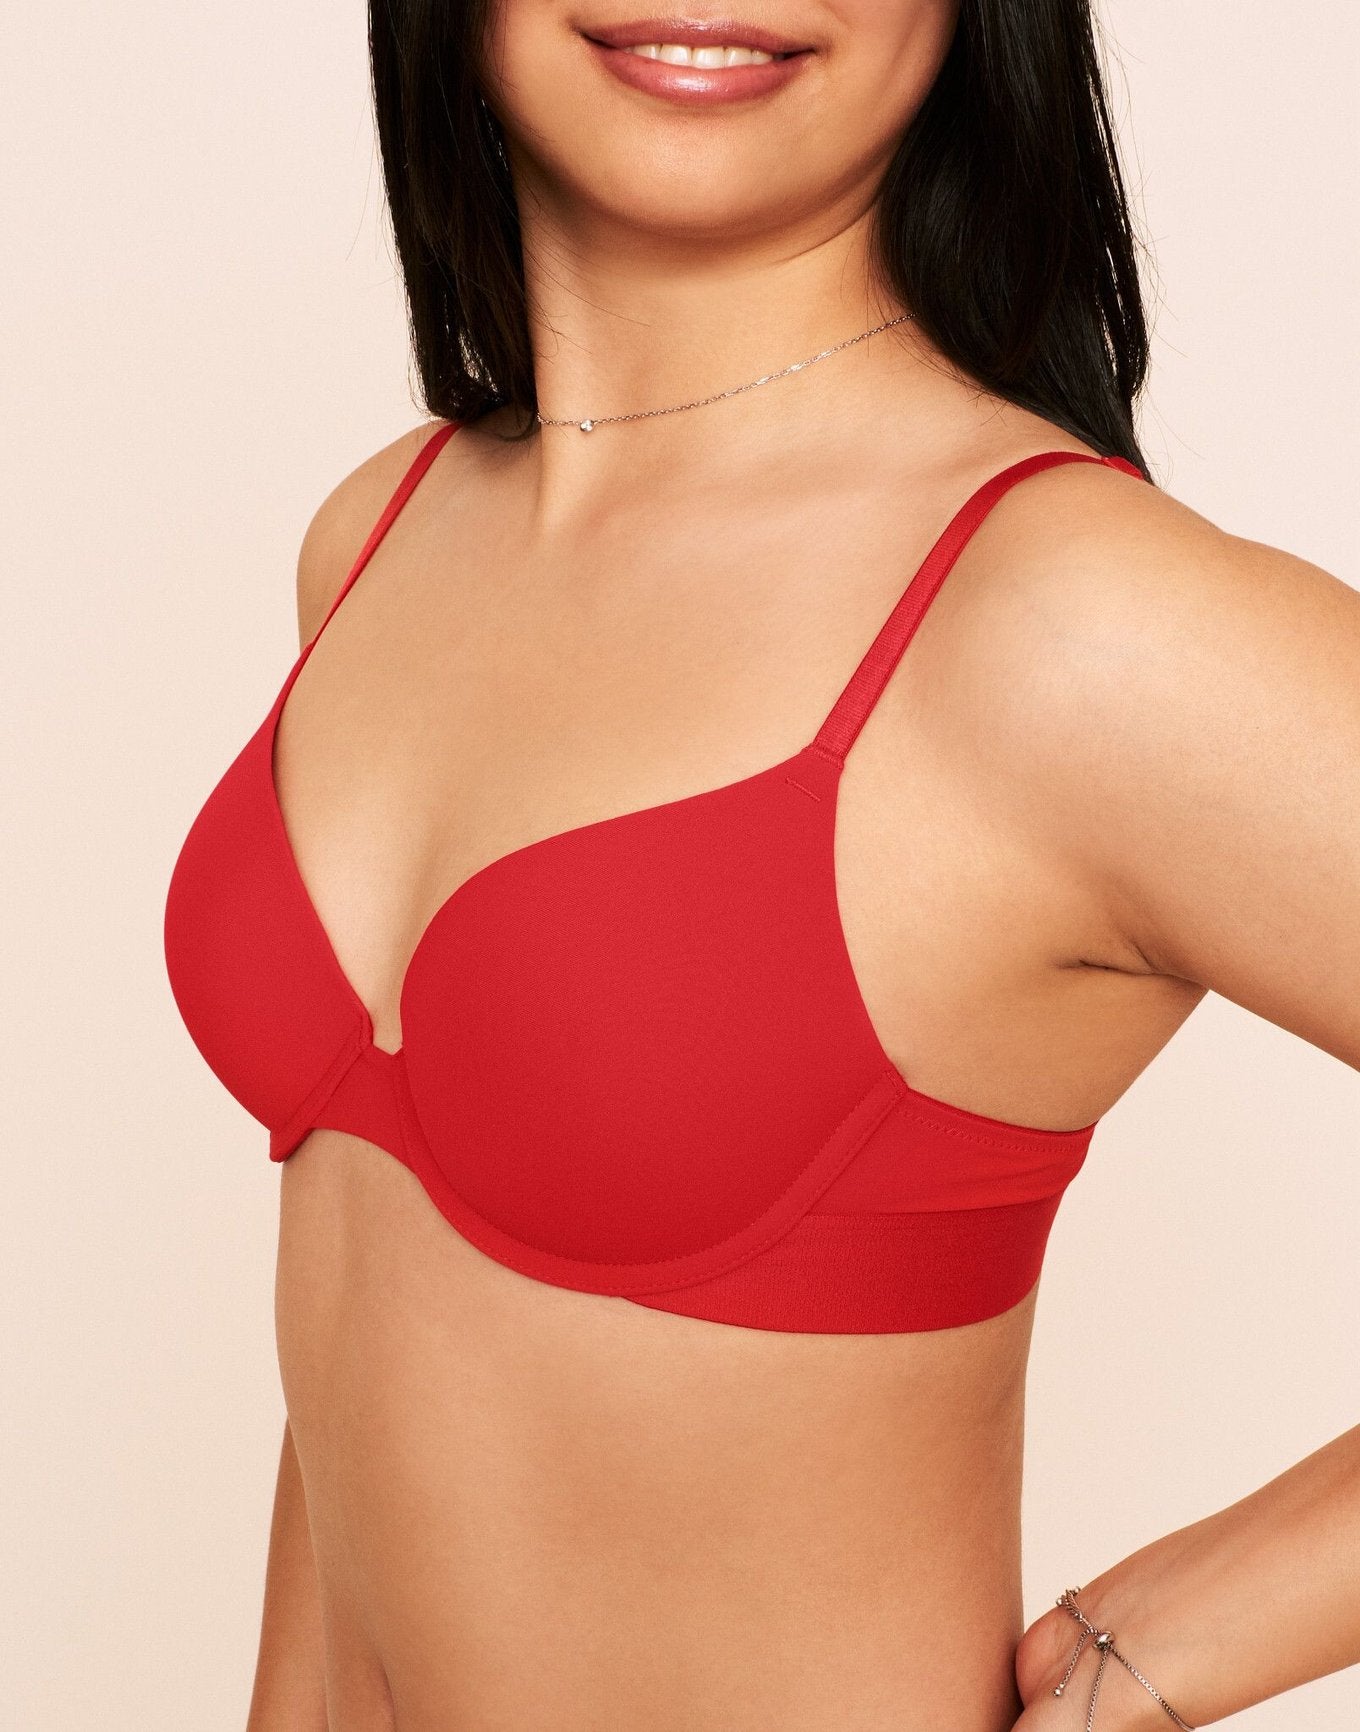 Earth Republic Jordyn Plunge Push Up Bra Push-Up Bra in color Flame Scarlet and shape plunge